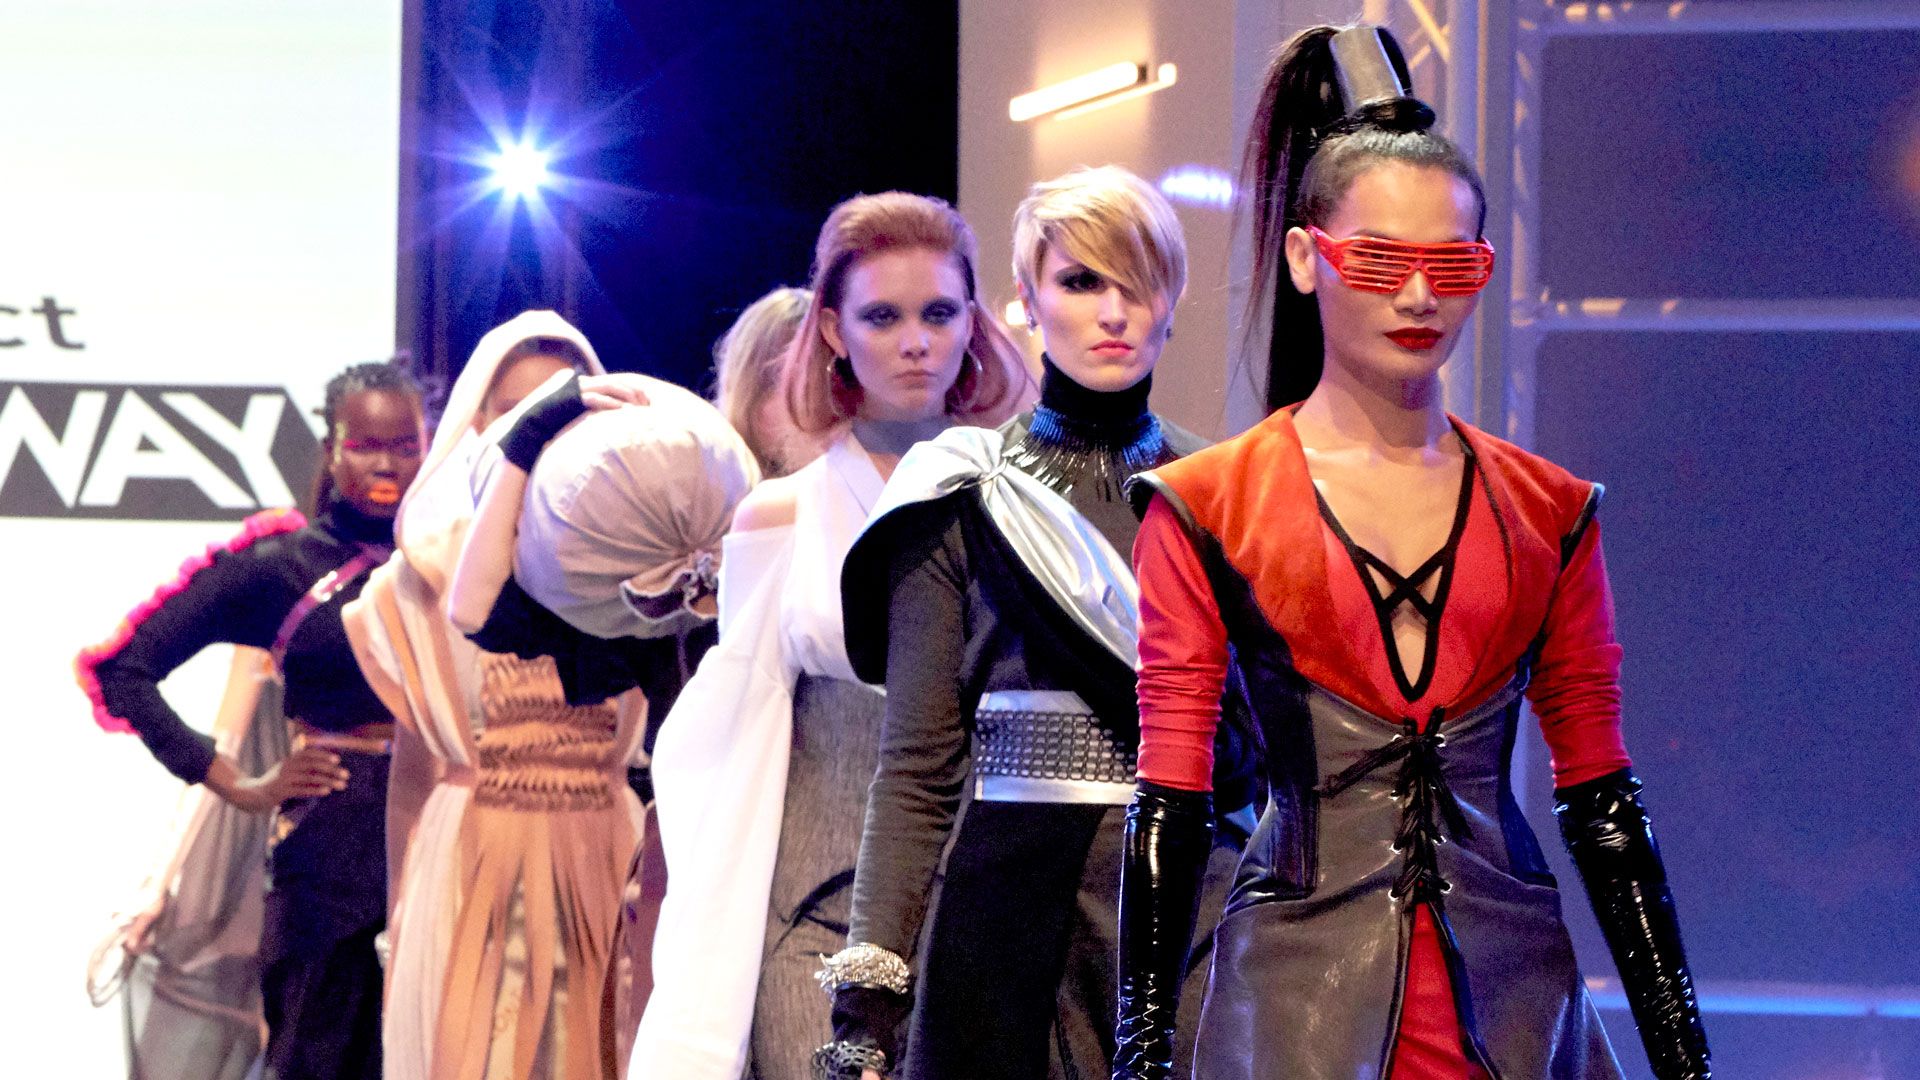 Project Runway Hosted a Fun Video Game Design Episode